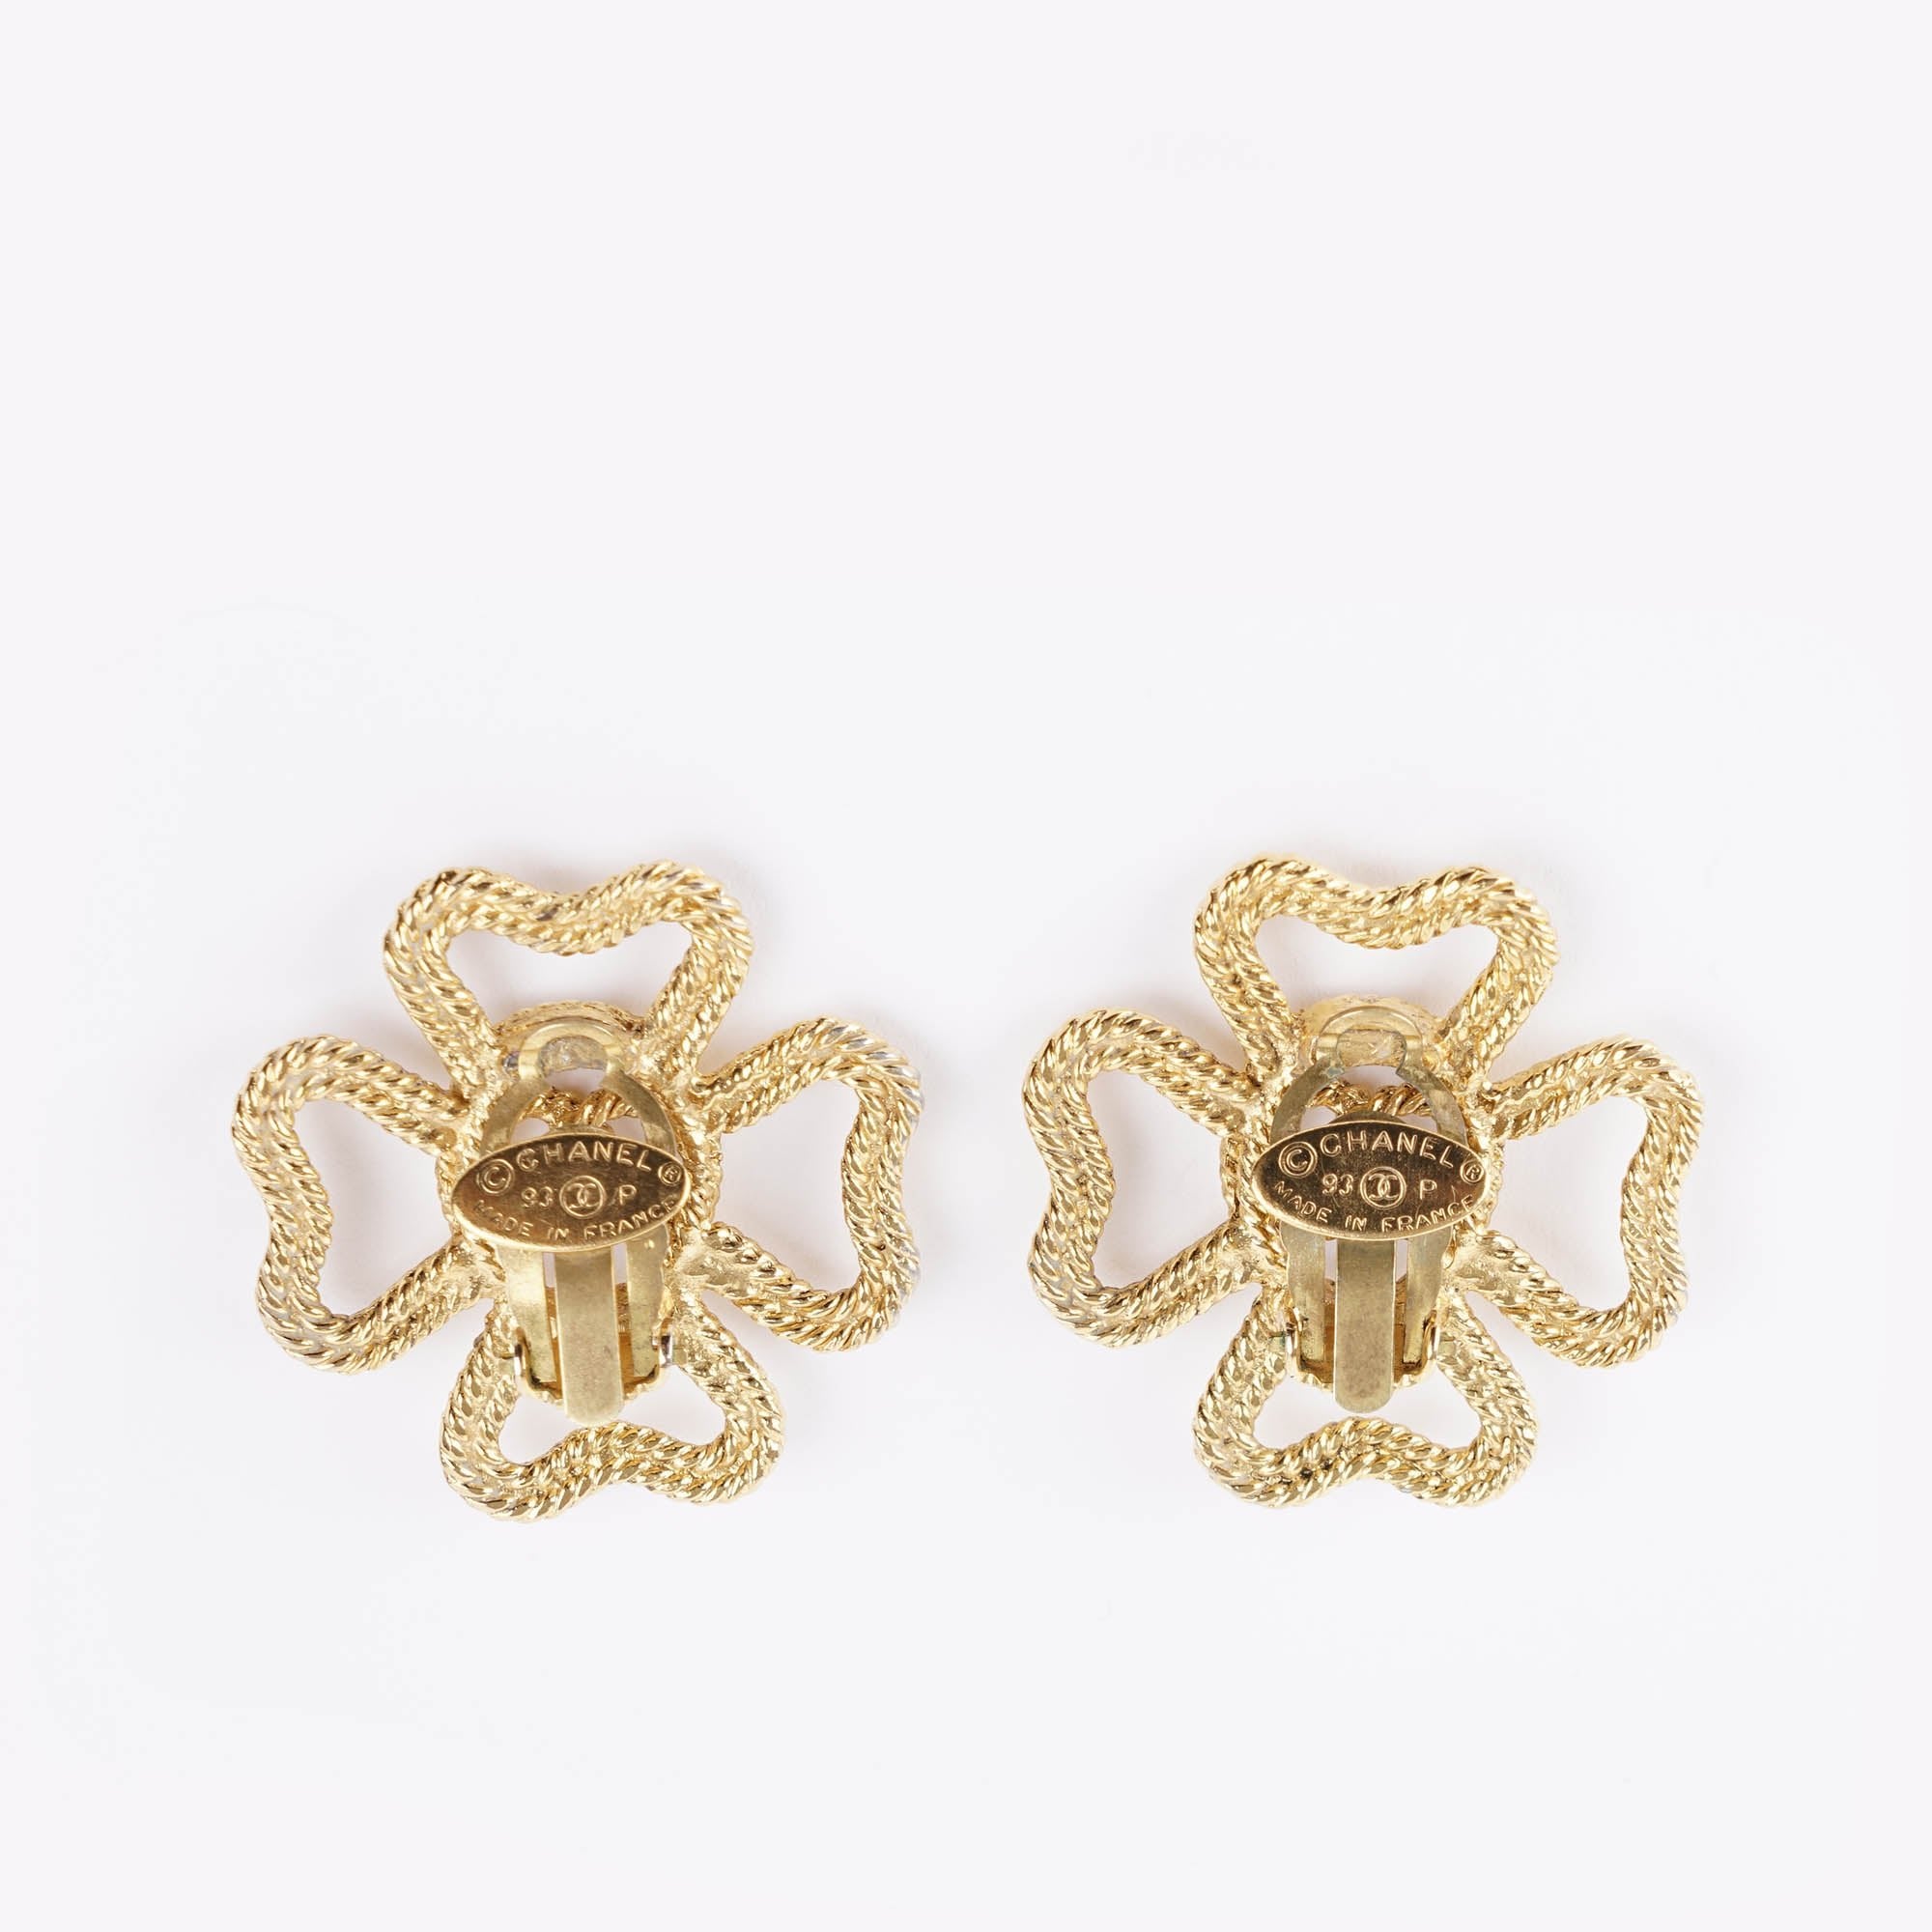 Large Vintage CC Clips Earrings - CHANEL - Affordable Luxury image